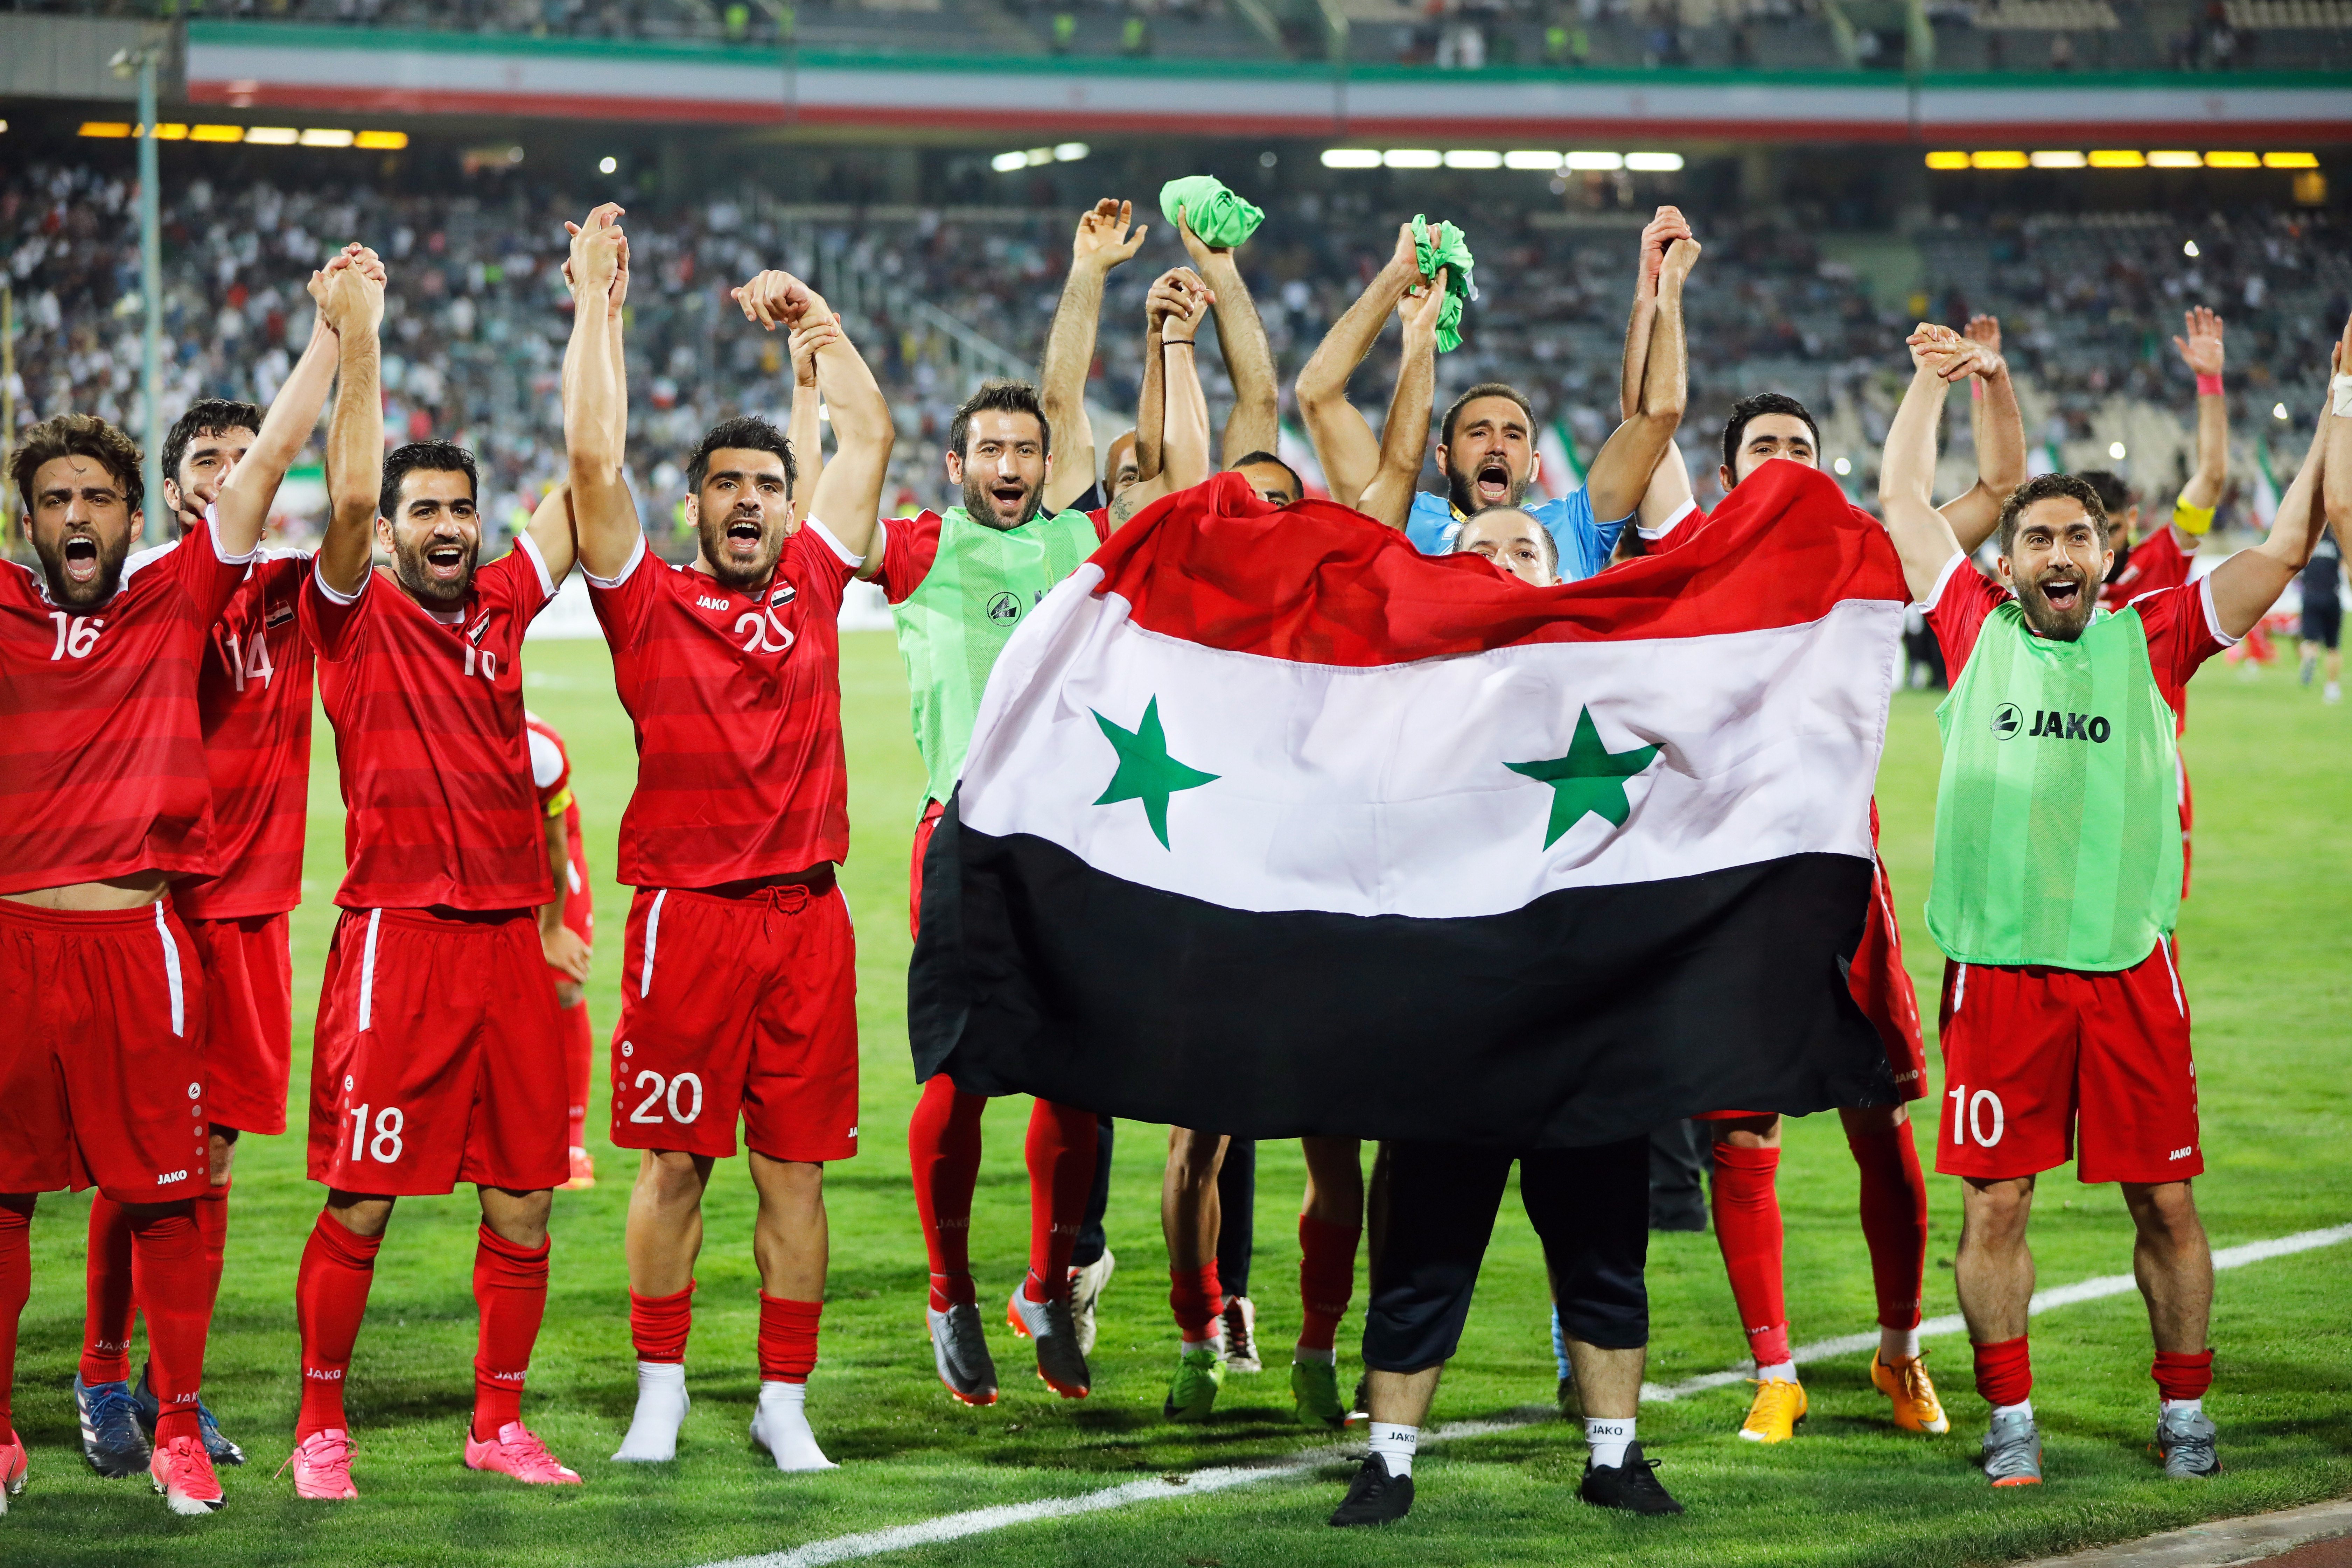 Syria players celebrate after the Fifa World Cup 2018 qualifying draw against Iran put them into a qualification play-off. Photo: EPA